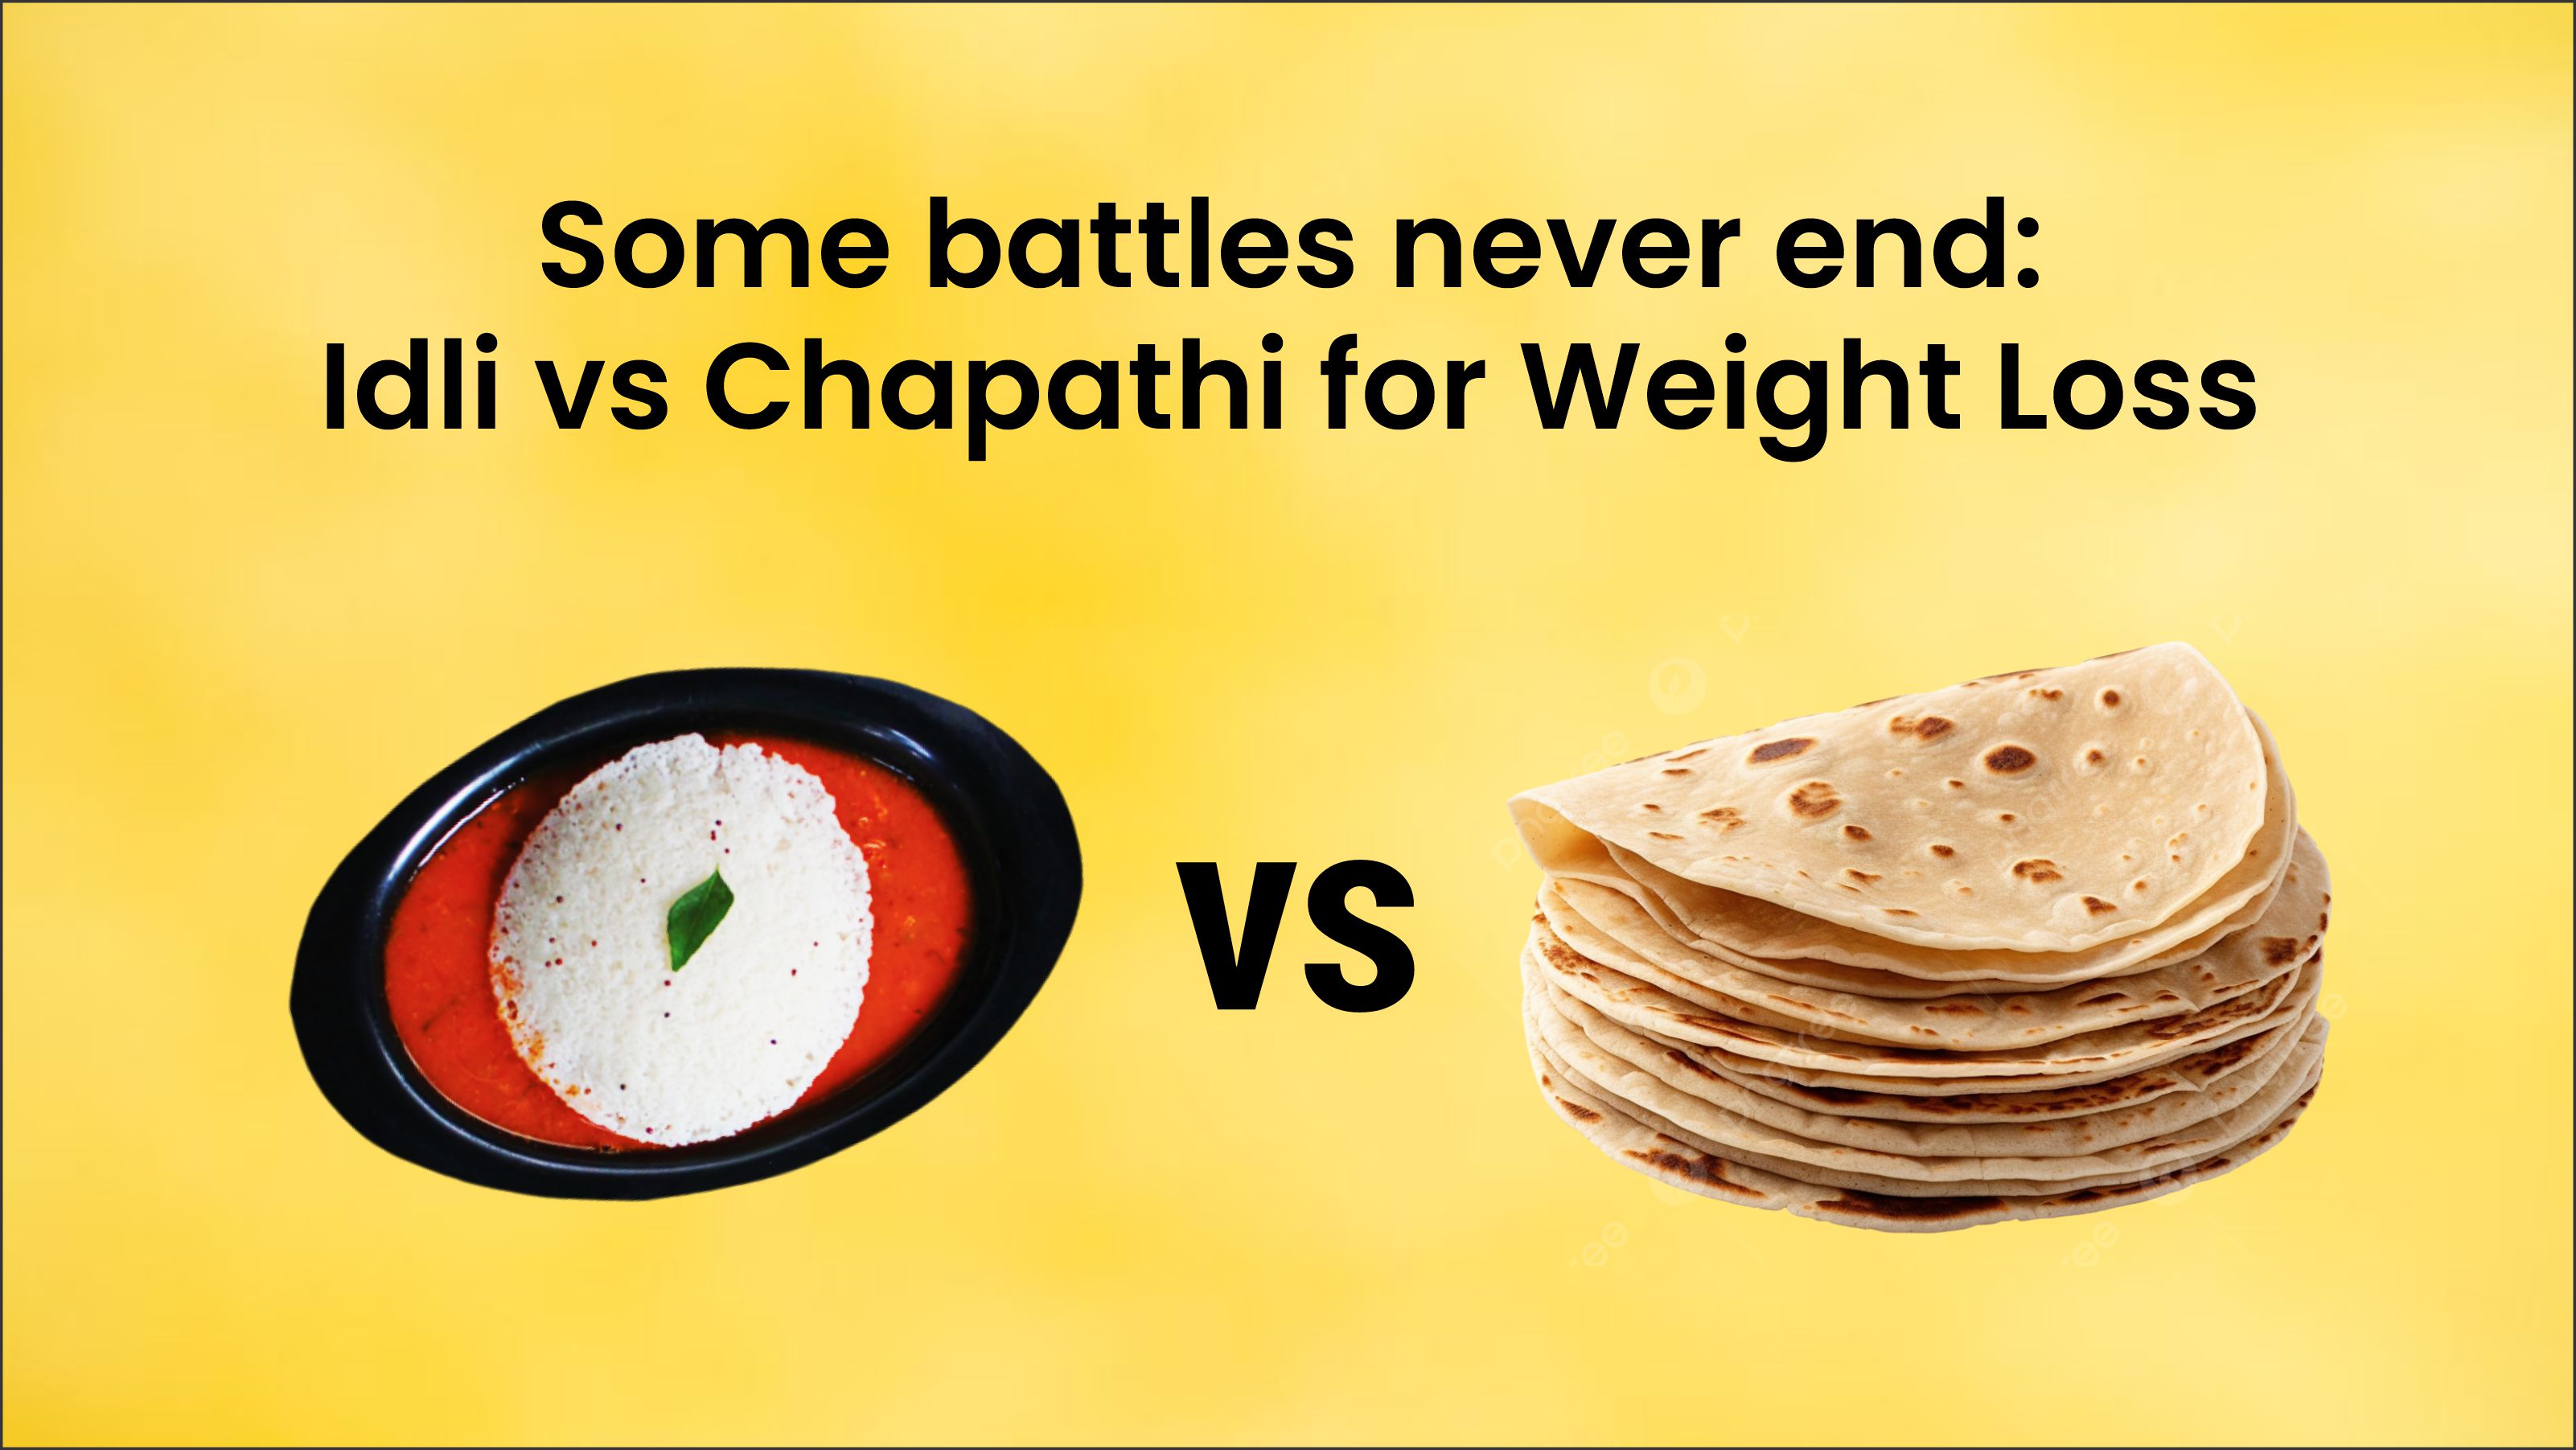 Some battles never end: Idli vs Chapathi for Weight Loss